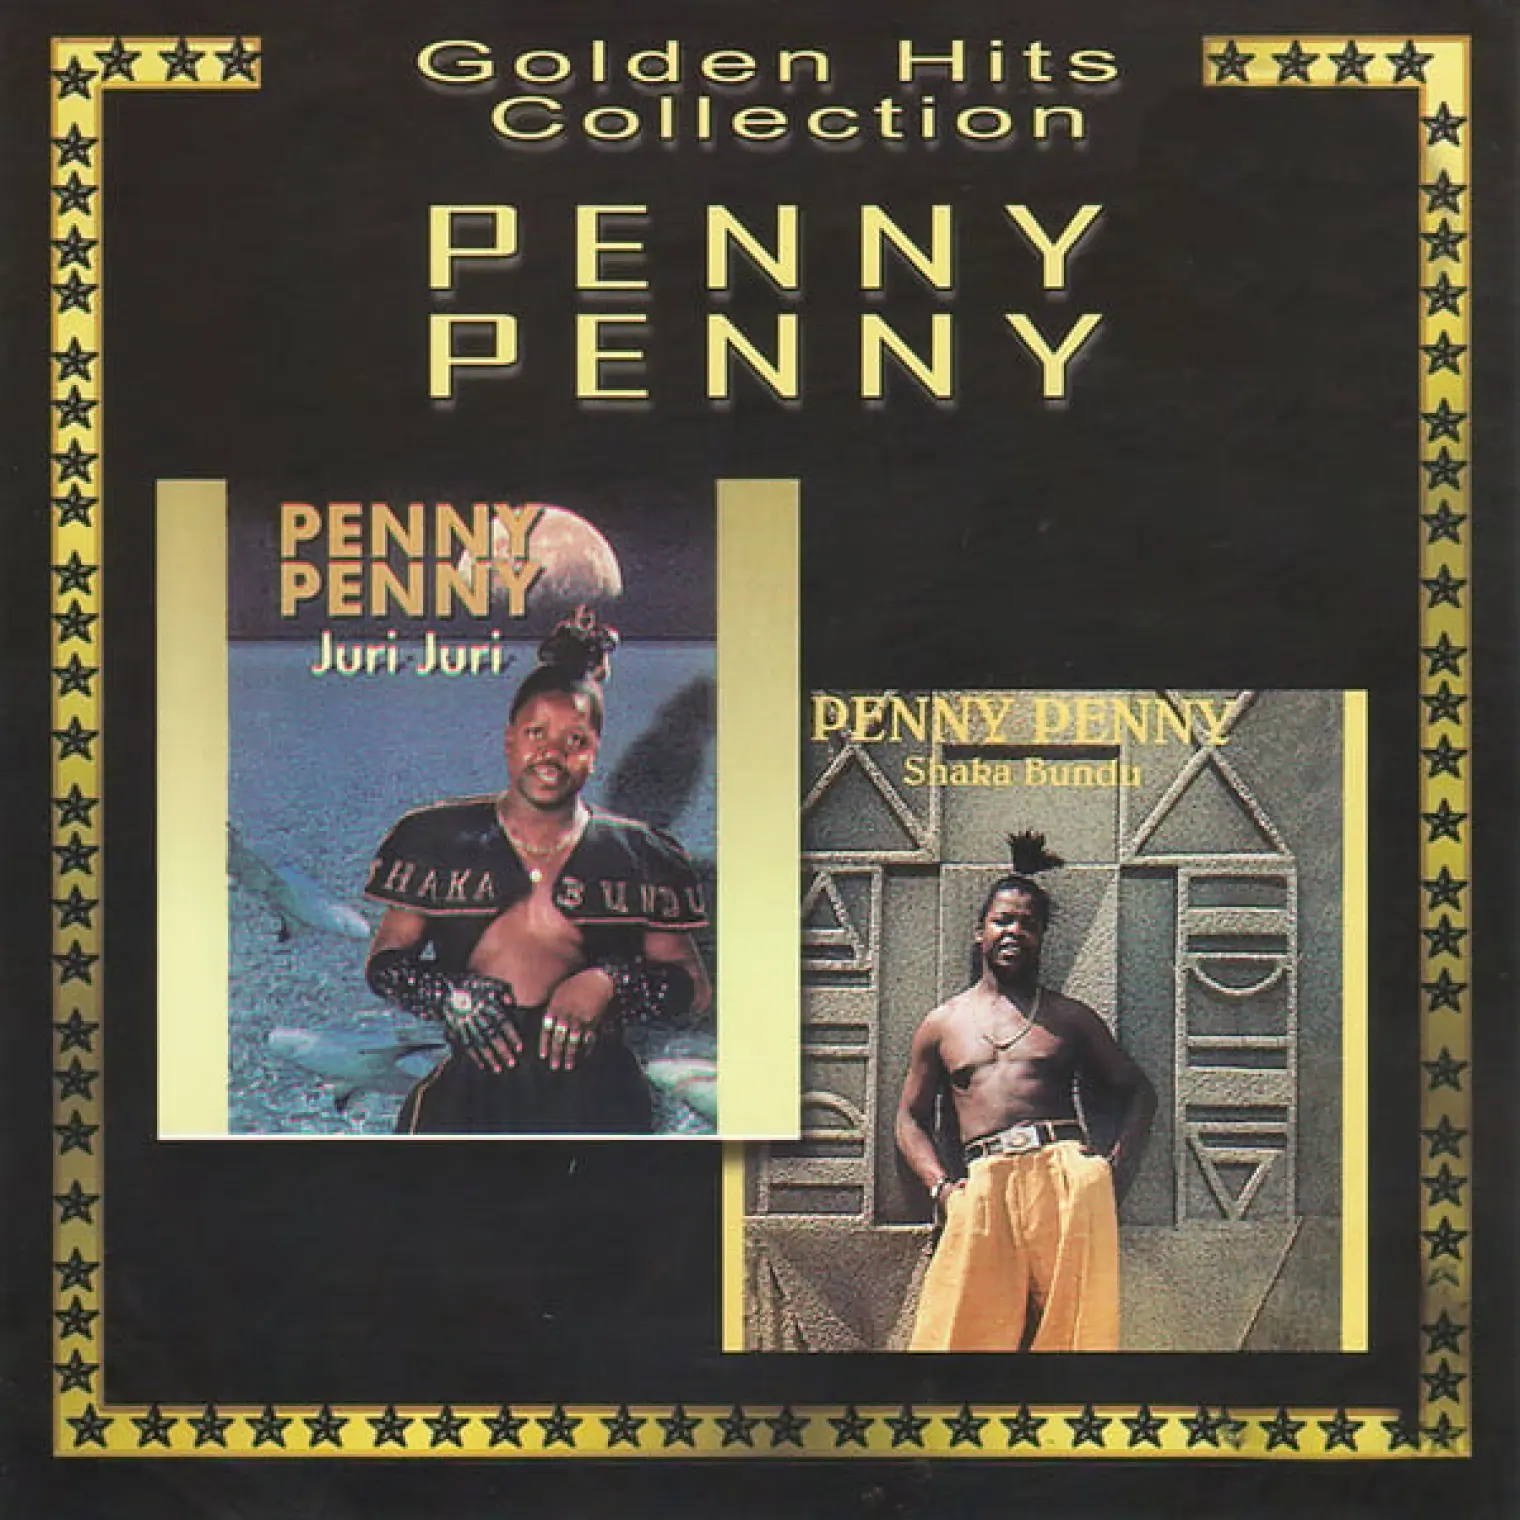 Golden Hits Collection -  Penny Penny 